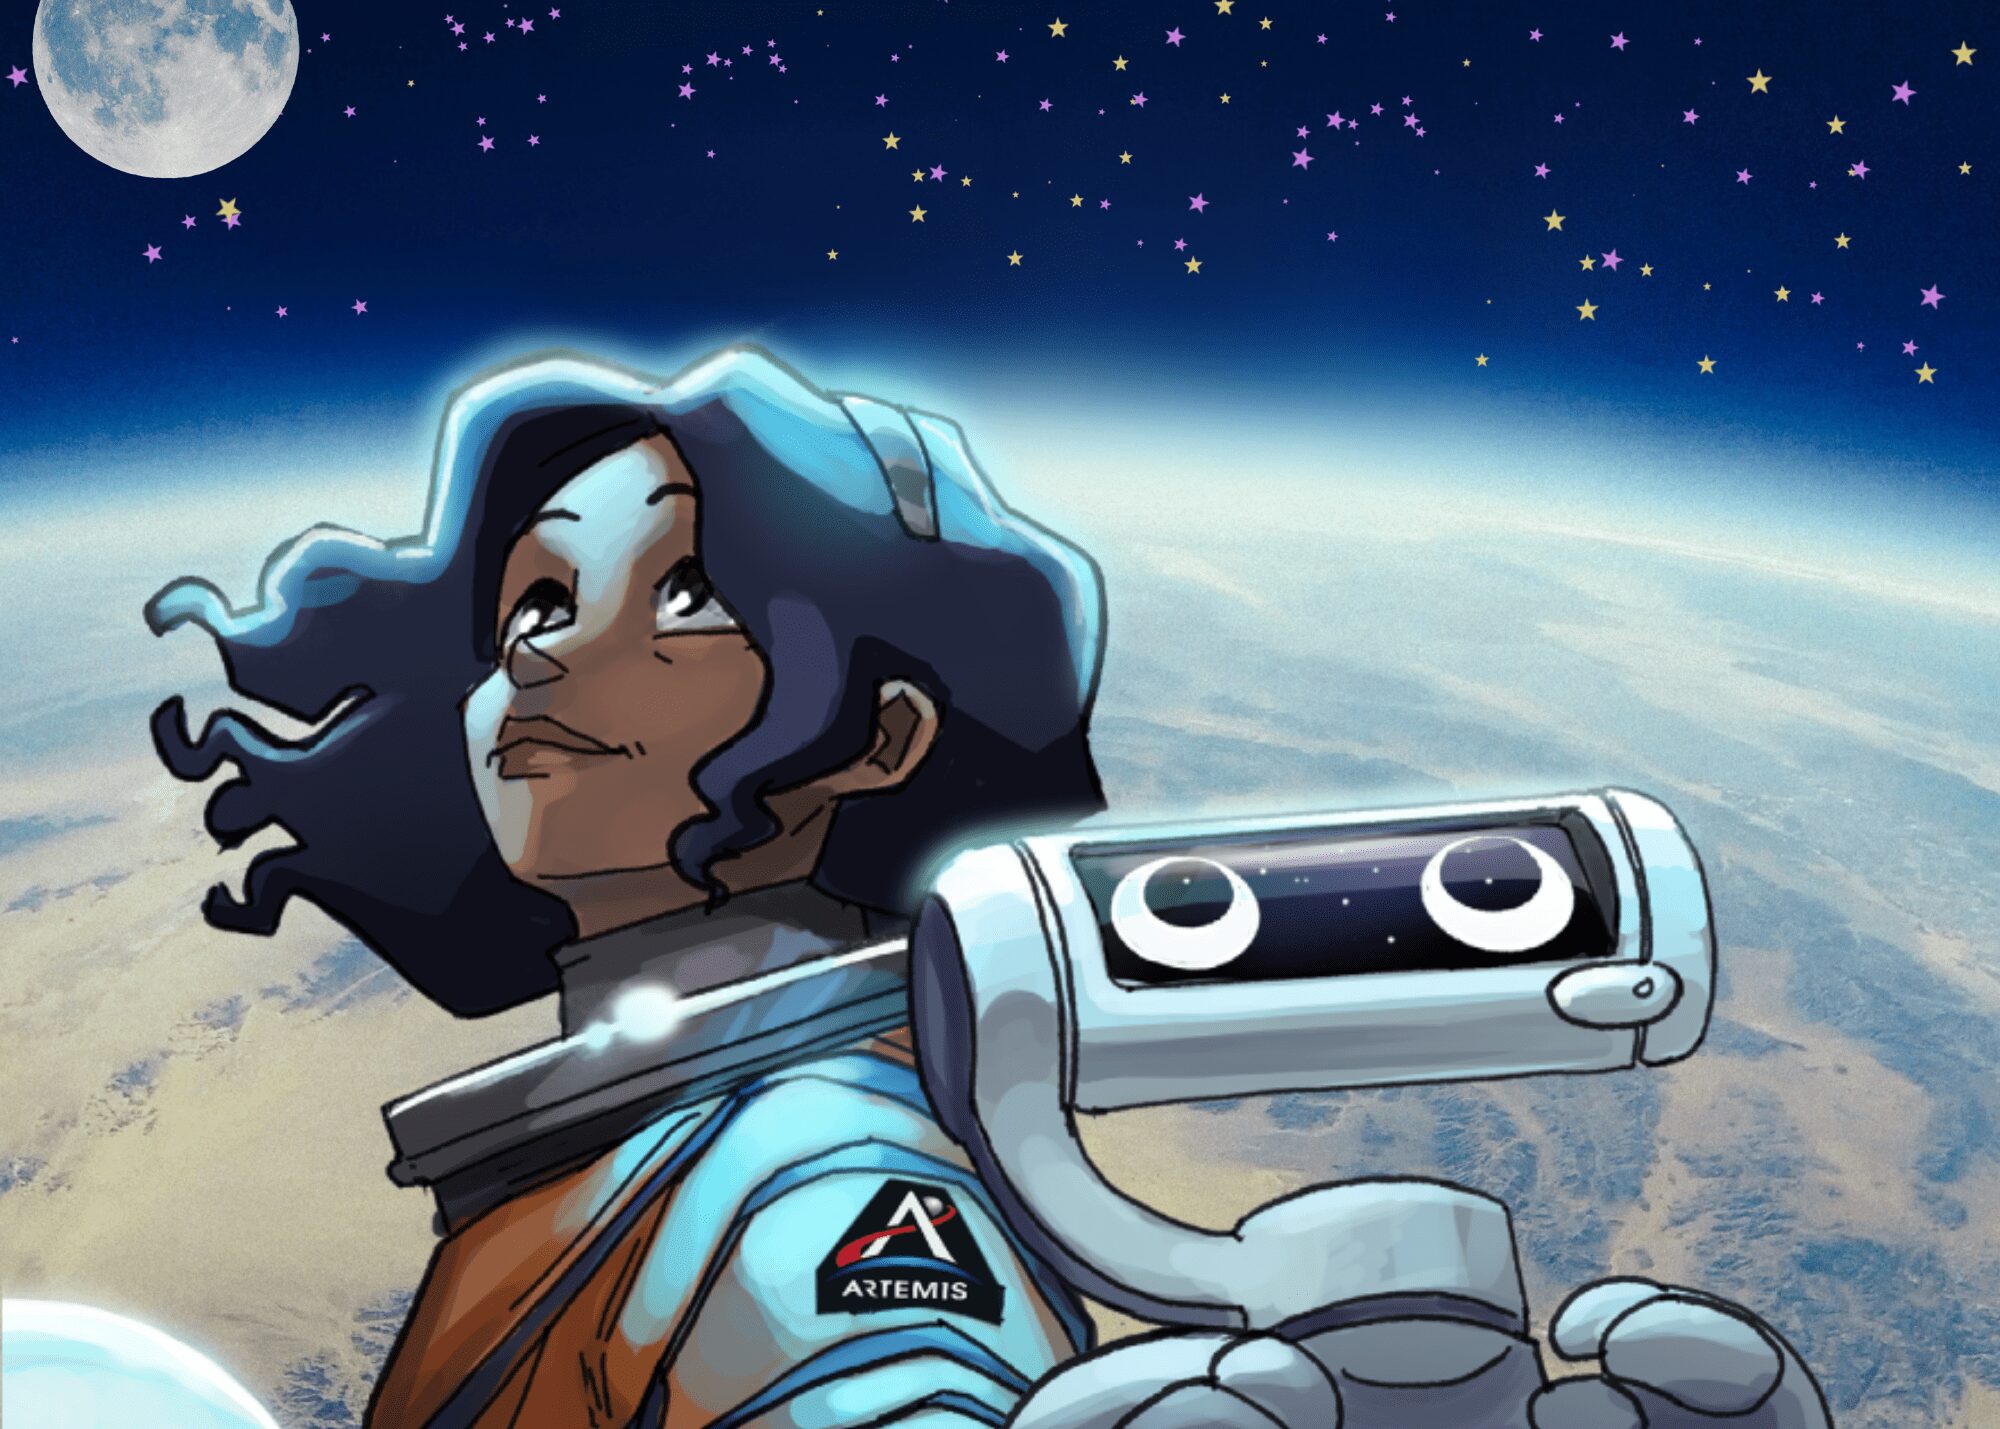 In NASA’s New Interactive Graphic Novel, a Latina is the “First Woman” on the Moon!